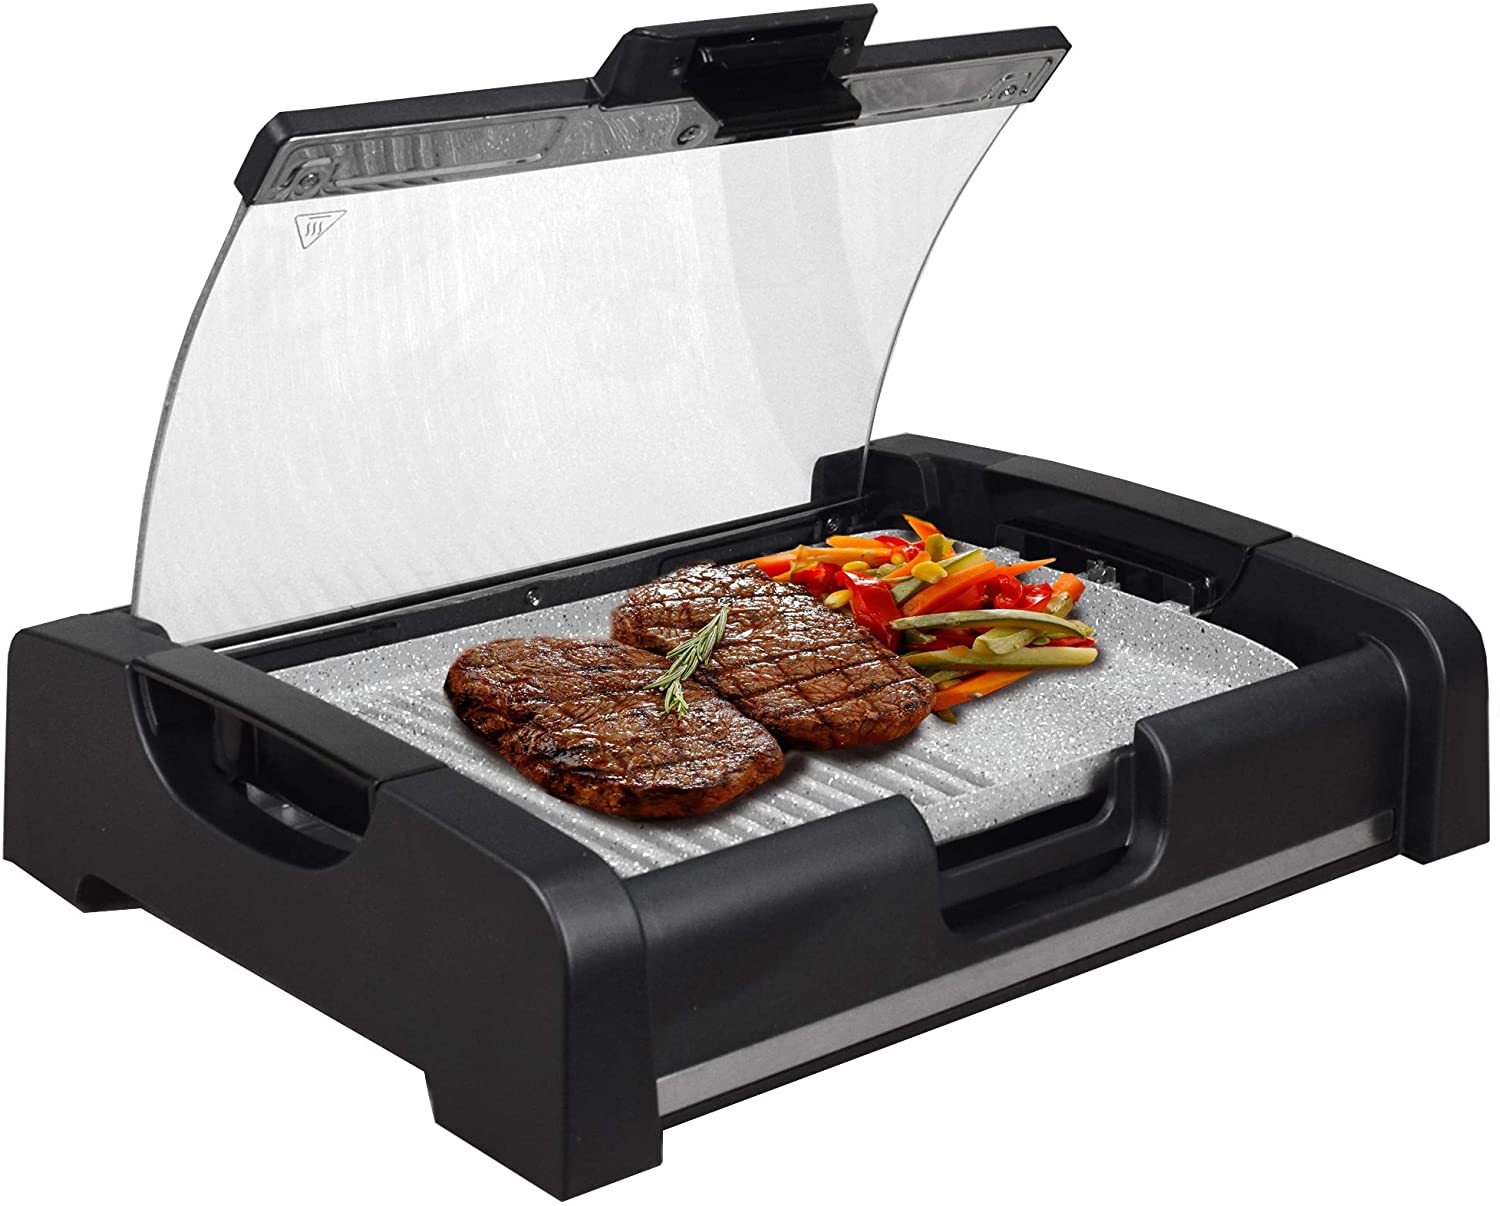 Syntrox Germany TG-1650W Electric Table Grill with Ceramic Grill Plate Electric Grill BBQ Grill Barbecue with Glass Lid